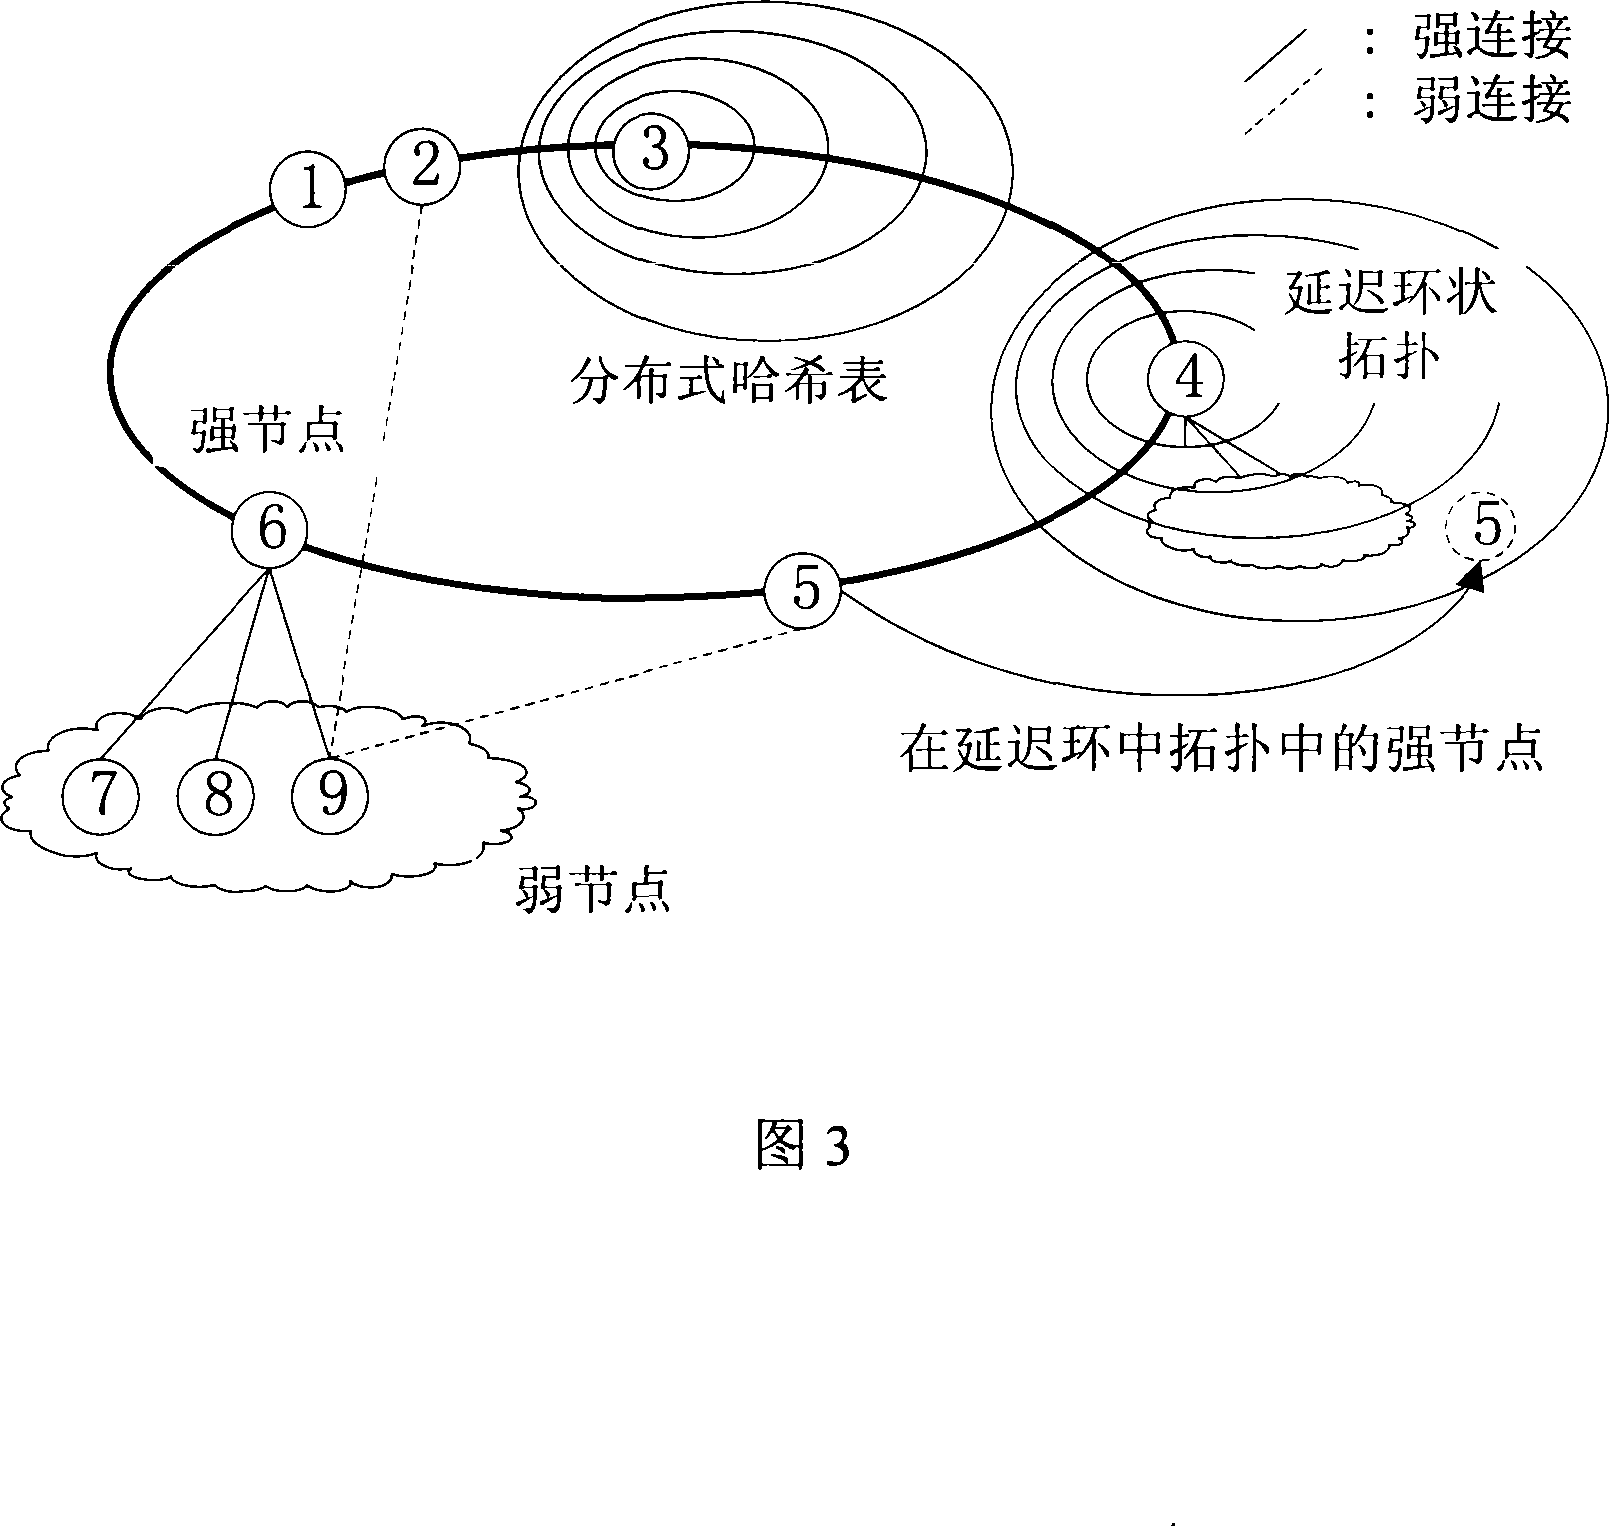 Universal resource management method under confusion type peer-to-peer network environment